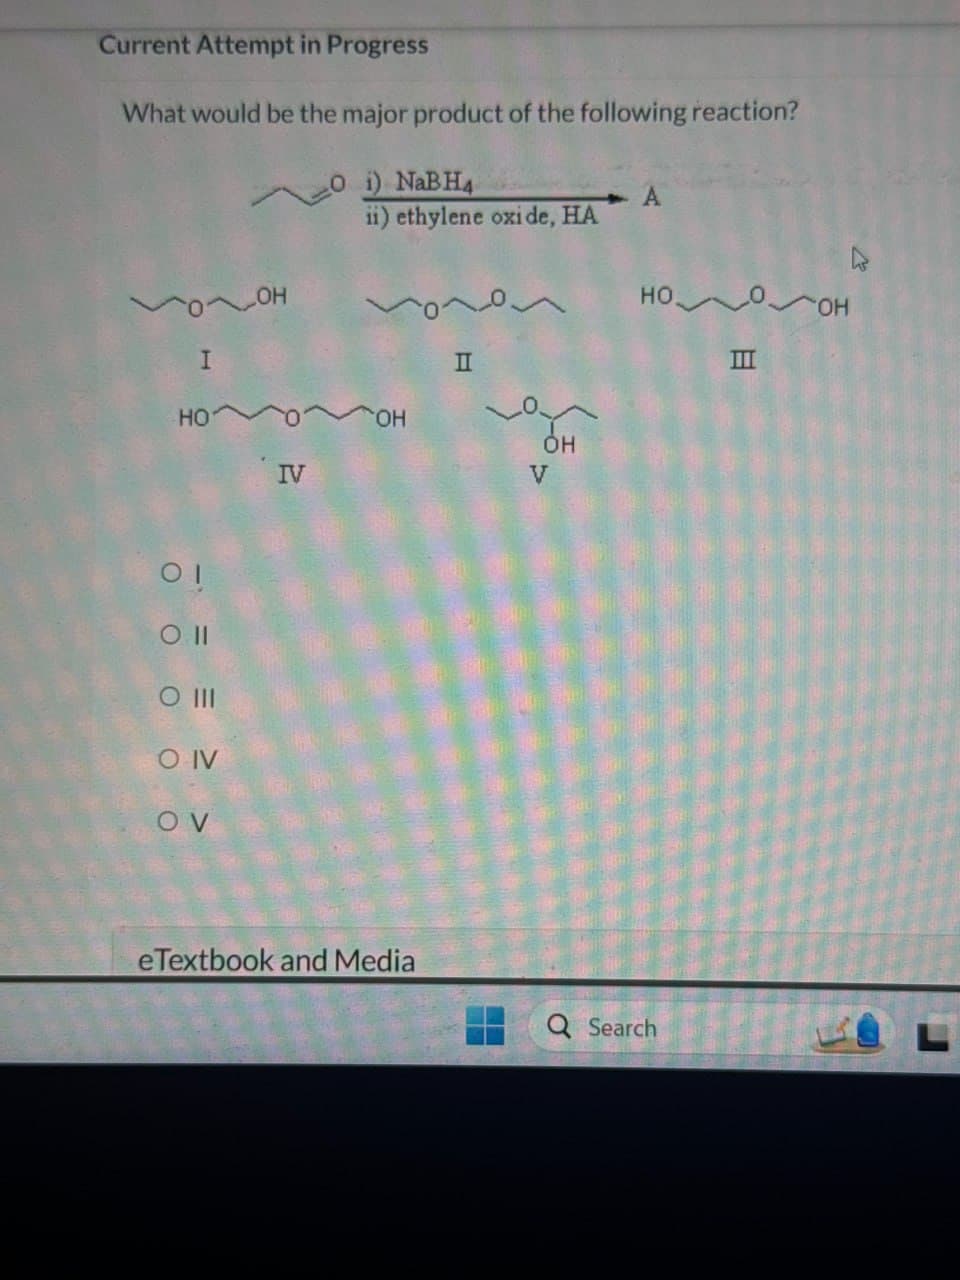 Current Attempt in Progress
What would be the major product of the following reaction?
O i) NaBH4
ii) ethylene oxide, HA
A
I
OH
HO
IV
01
O 11
0 III
O IV
OV
OH
II
V
OH
eTextbook and Media
HO
OH
III
Q Search